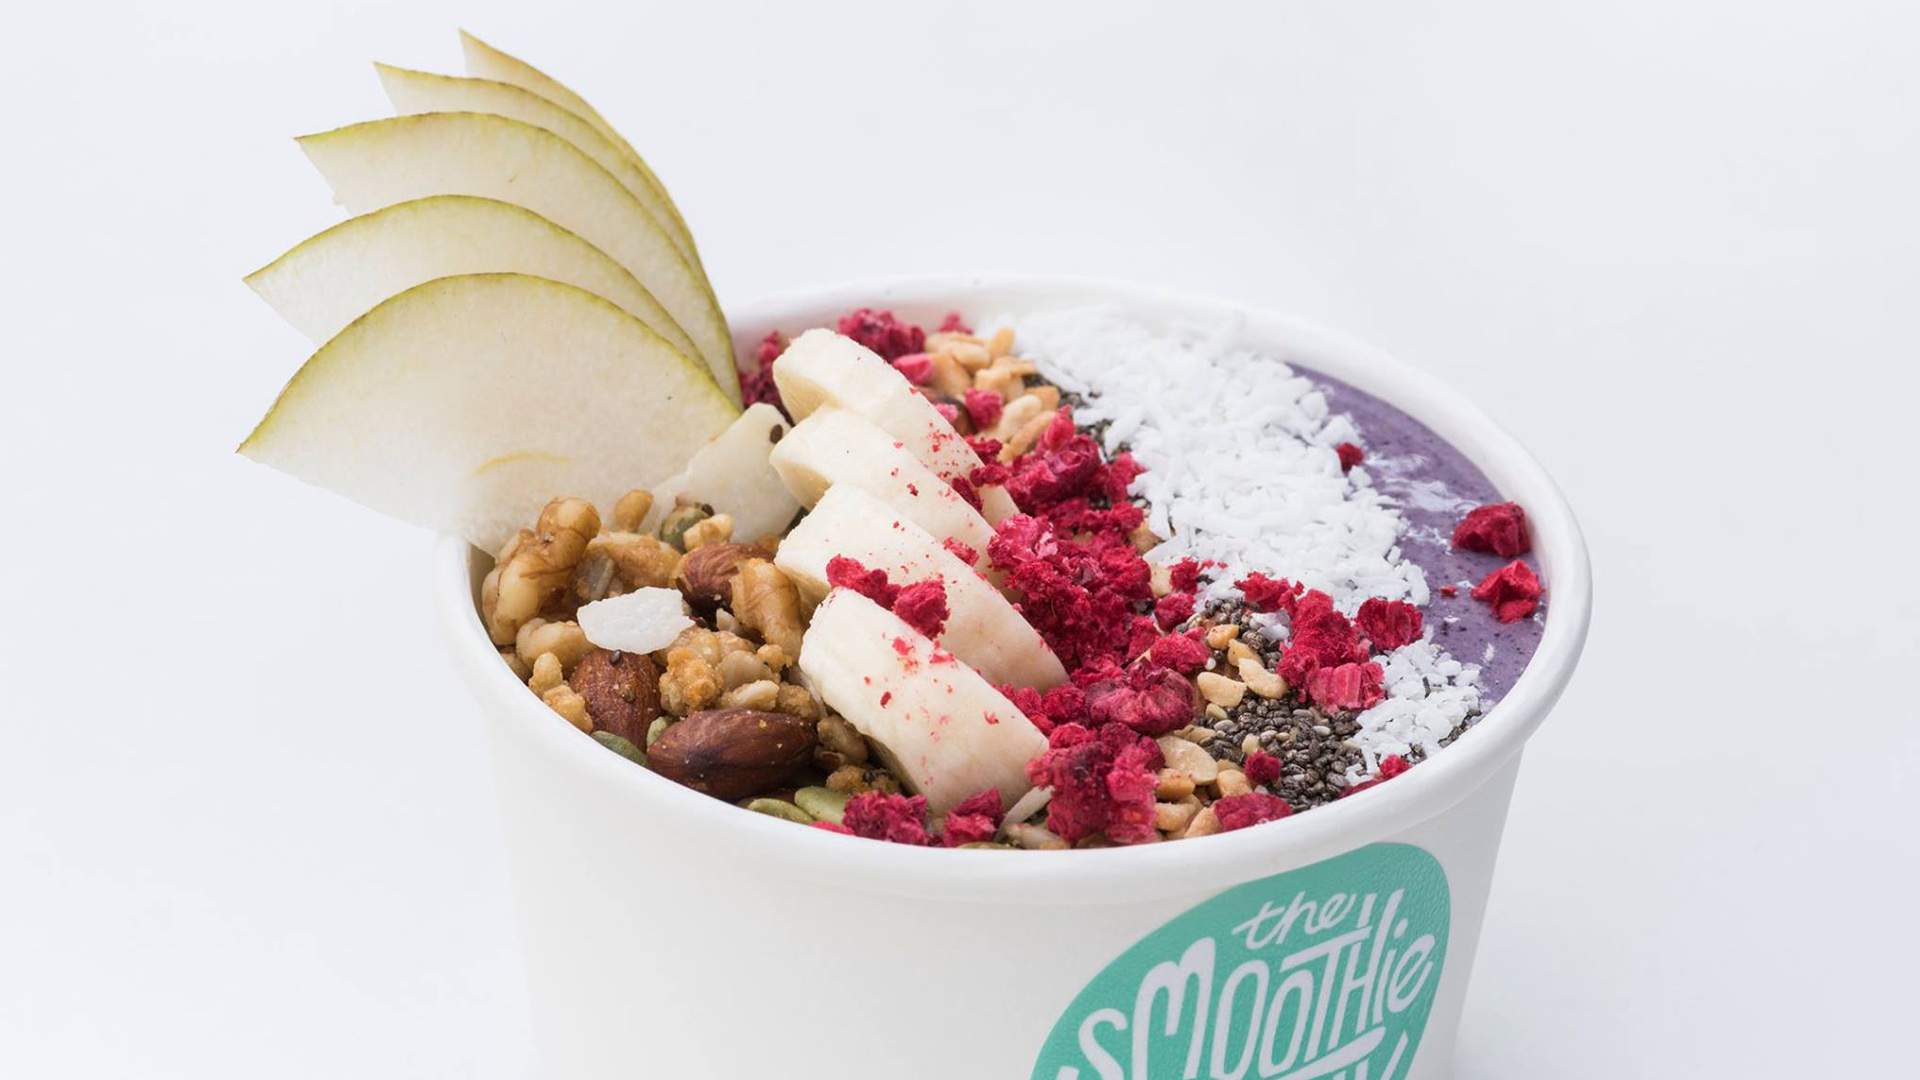 The Smoothie Bowl